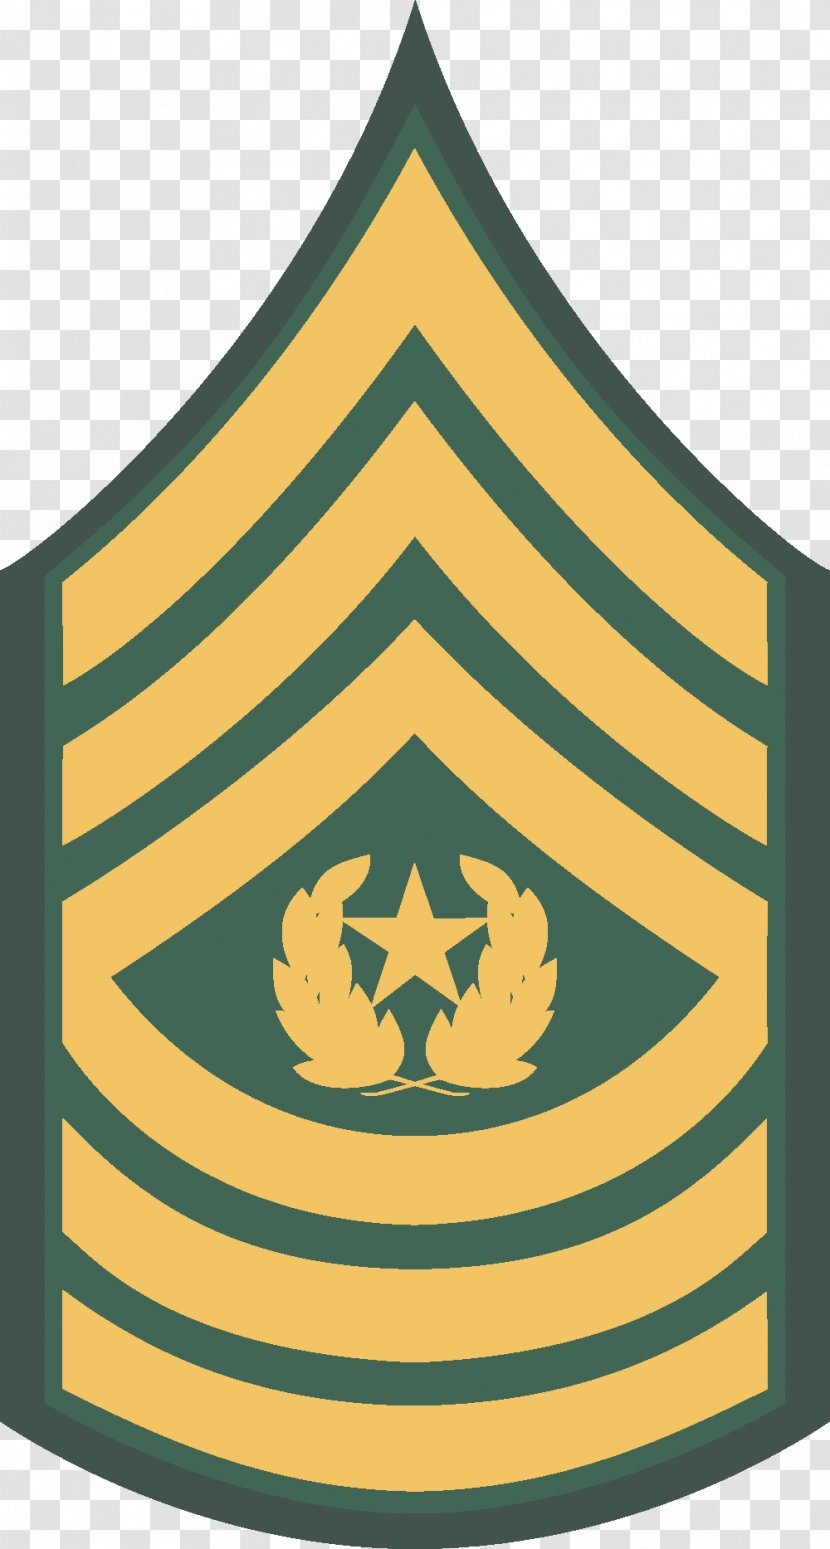 Sergeant Major Of The Army Military Rank Non-commissioned Officer - Enlisted Transparent PNG